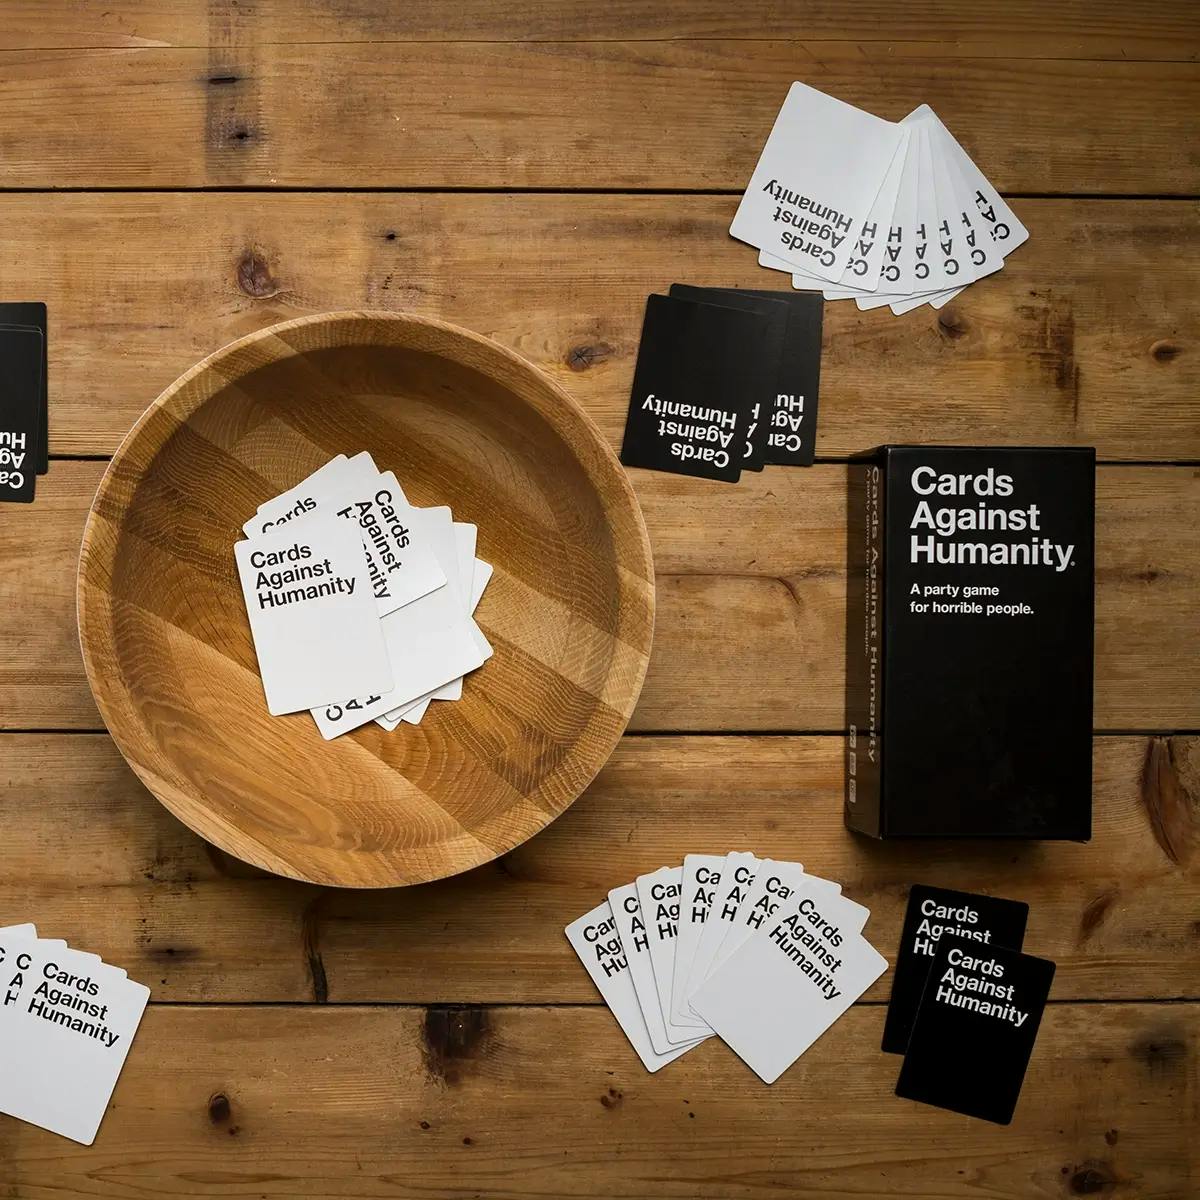 Cards Against Humanity cards spread out on a wooden table with a wooden platter in the middle.